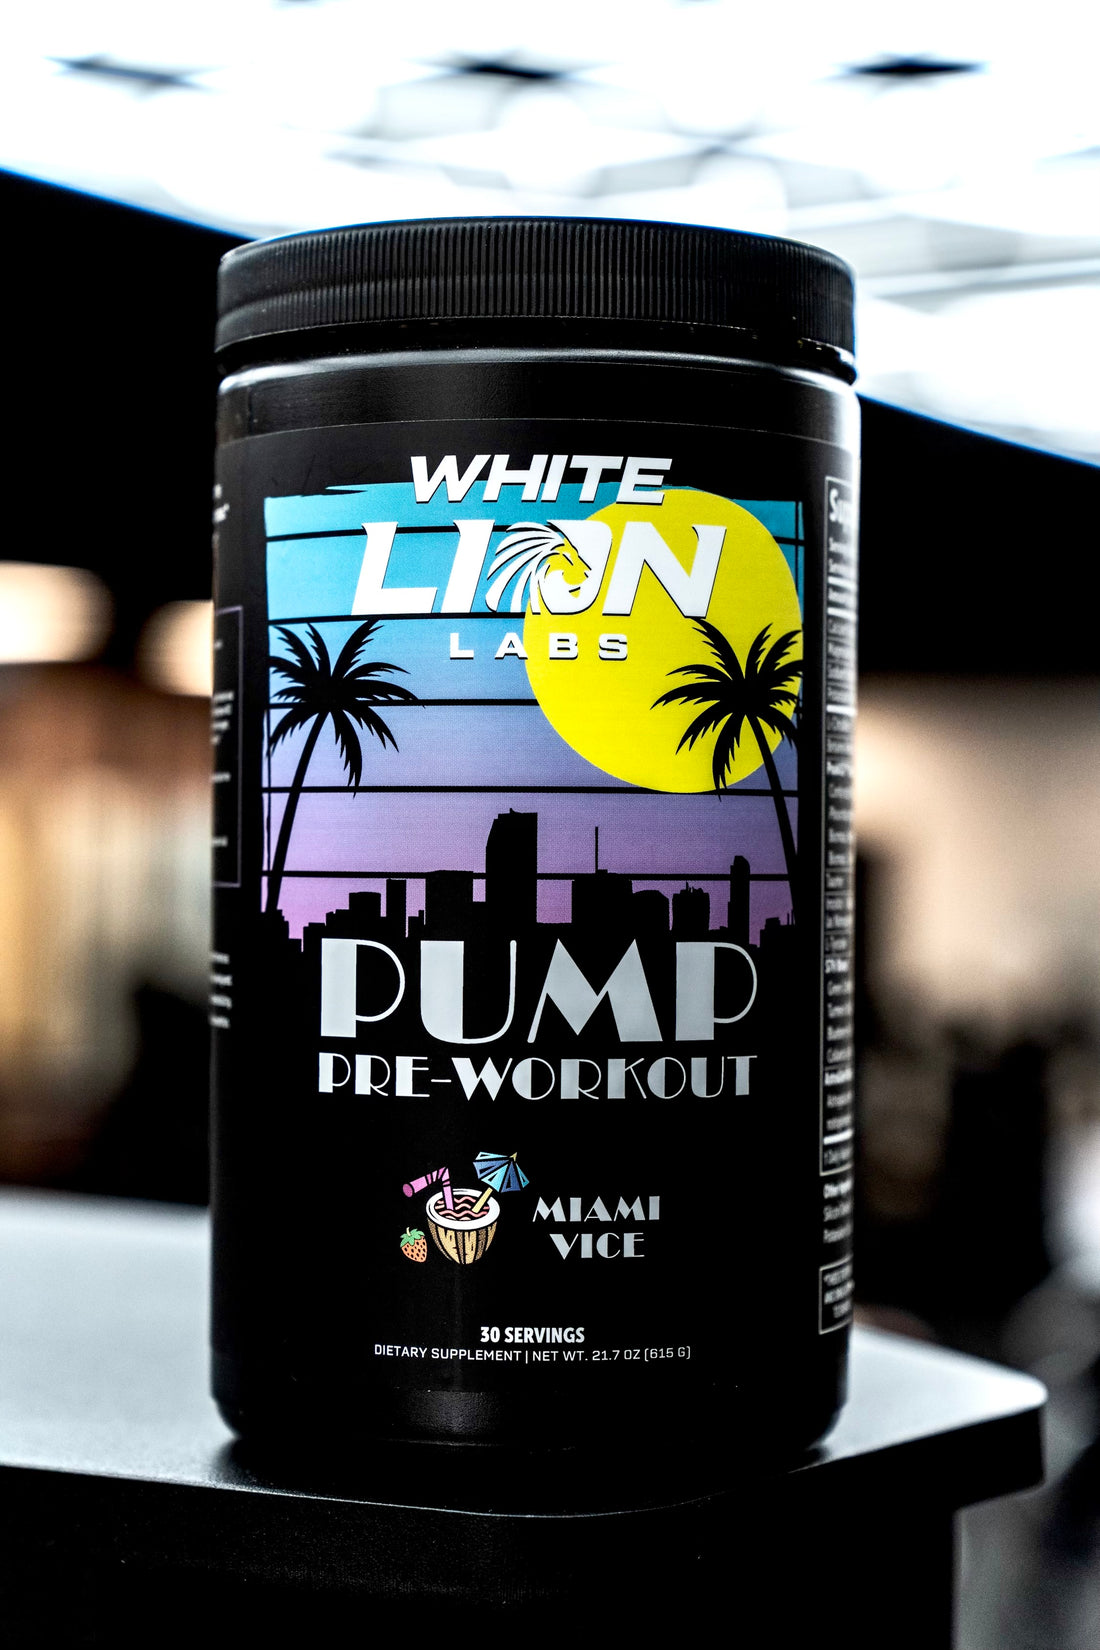 The Rising Trend of Pump Products: Amplifying Power with White Lion Labs' Miami Vice PUMP Pre-Workout